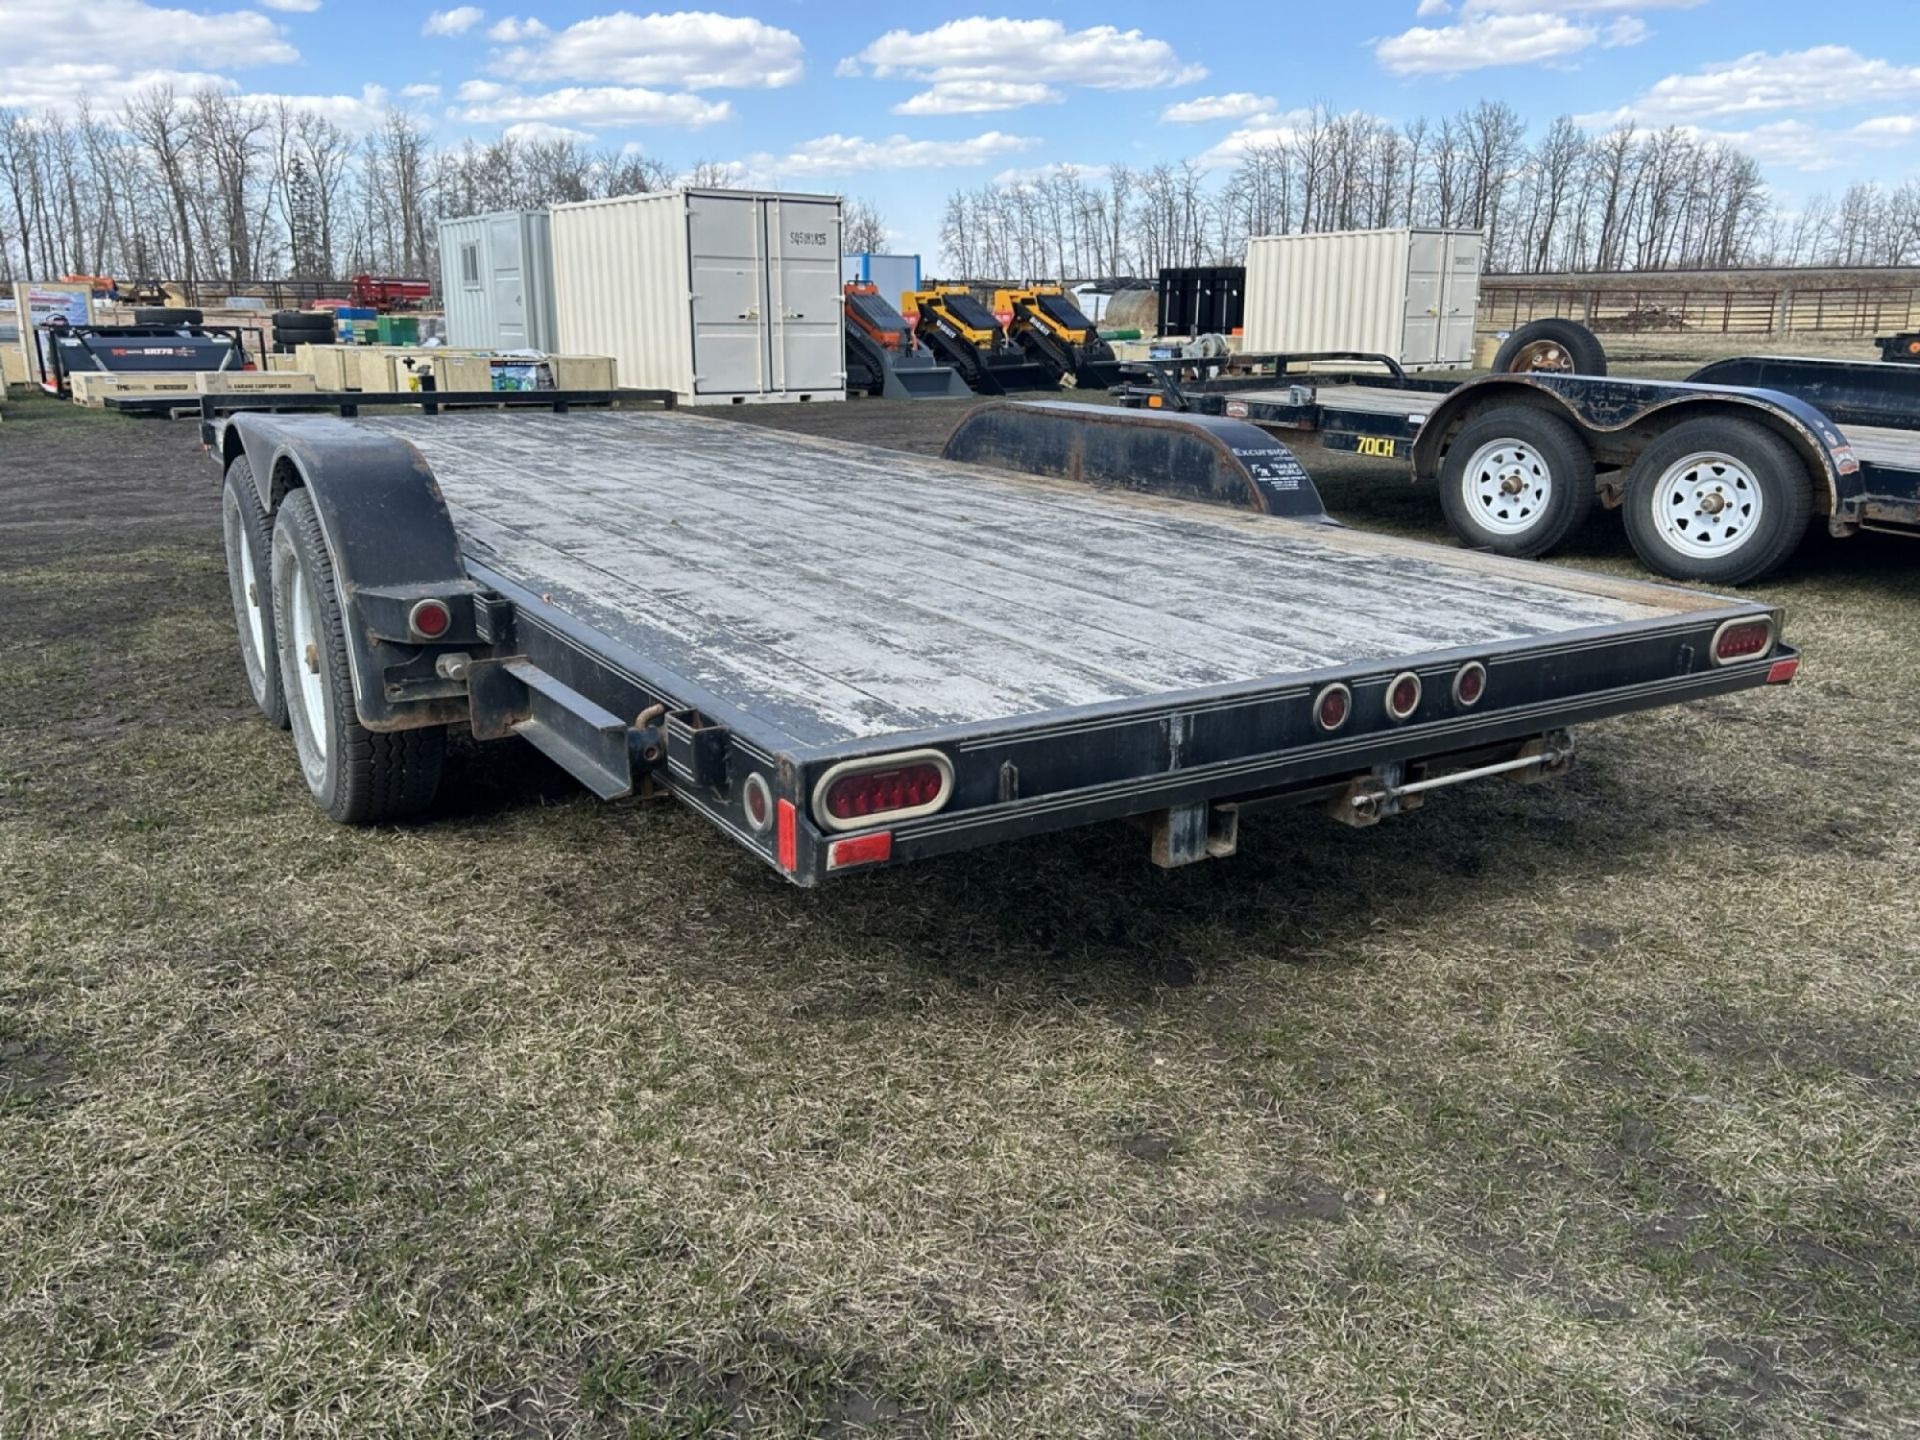 2017 18' CAR HAULER - LIGHTS, BRAKES WORK, NEW TIRES FROM OK TIRE S/N: 2RGBE1824H1000481 - Image 4 of 6